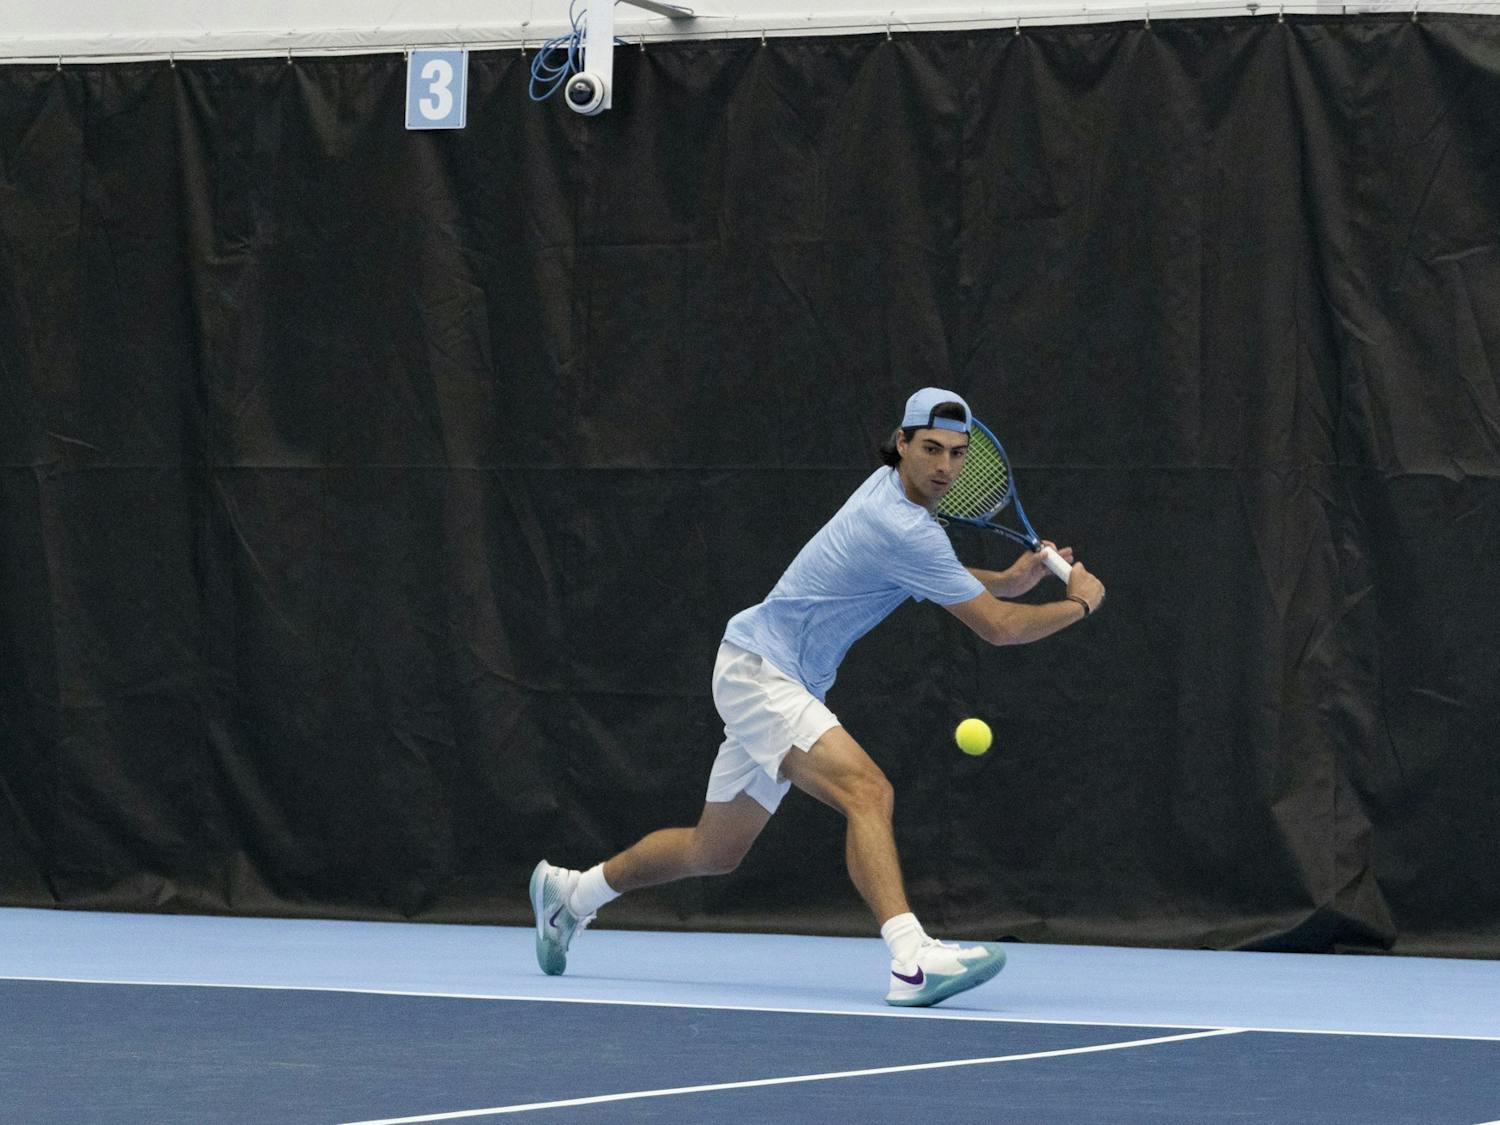 UNC junior tennis player Logan Zapp goes to take a hit at the ball during the home matchup against Duke at Cone-Kenfield Tennis Center on Saturday, April 8, 2023. UNC fell to Duke 5-2.